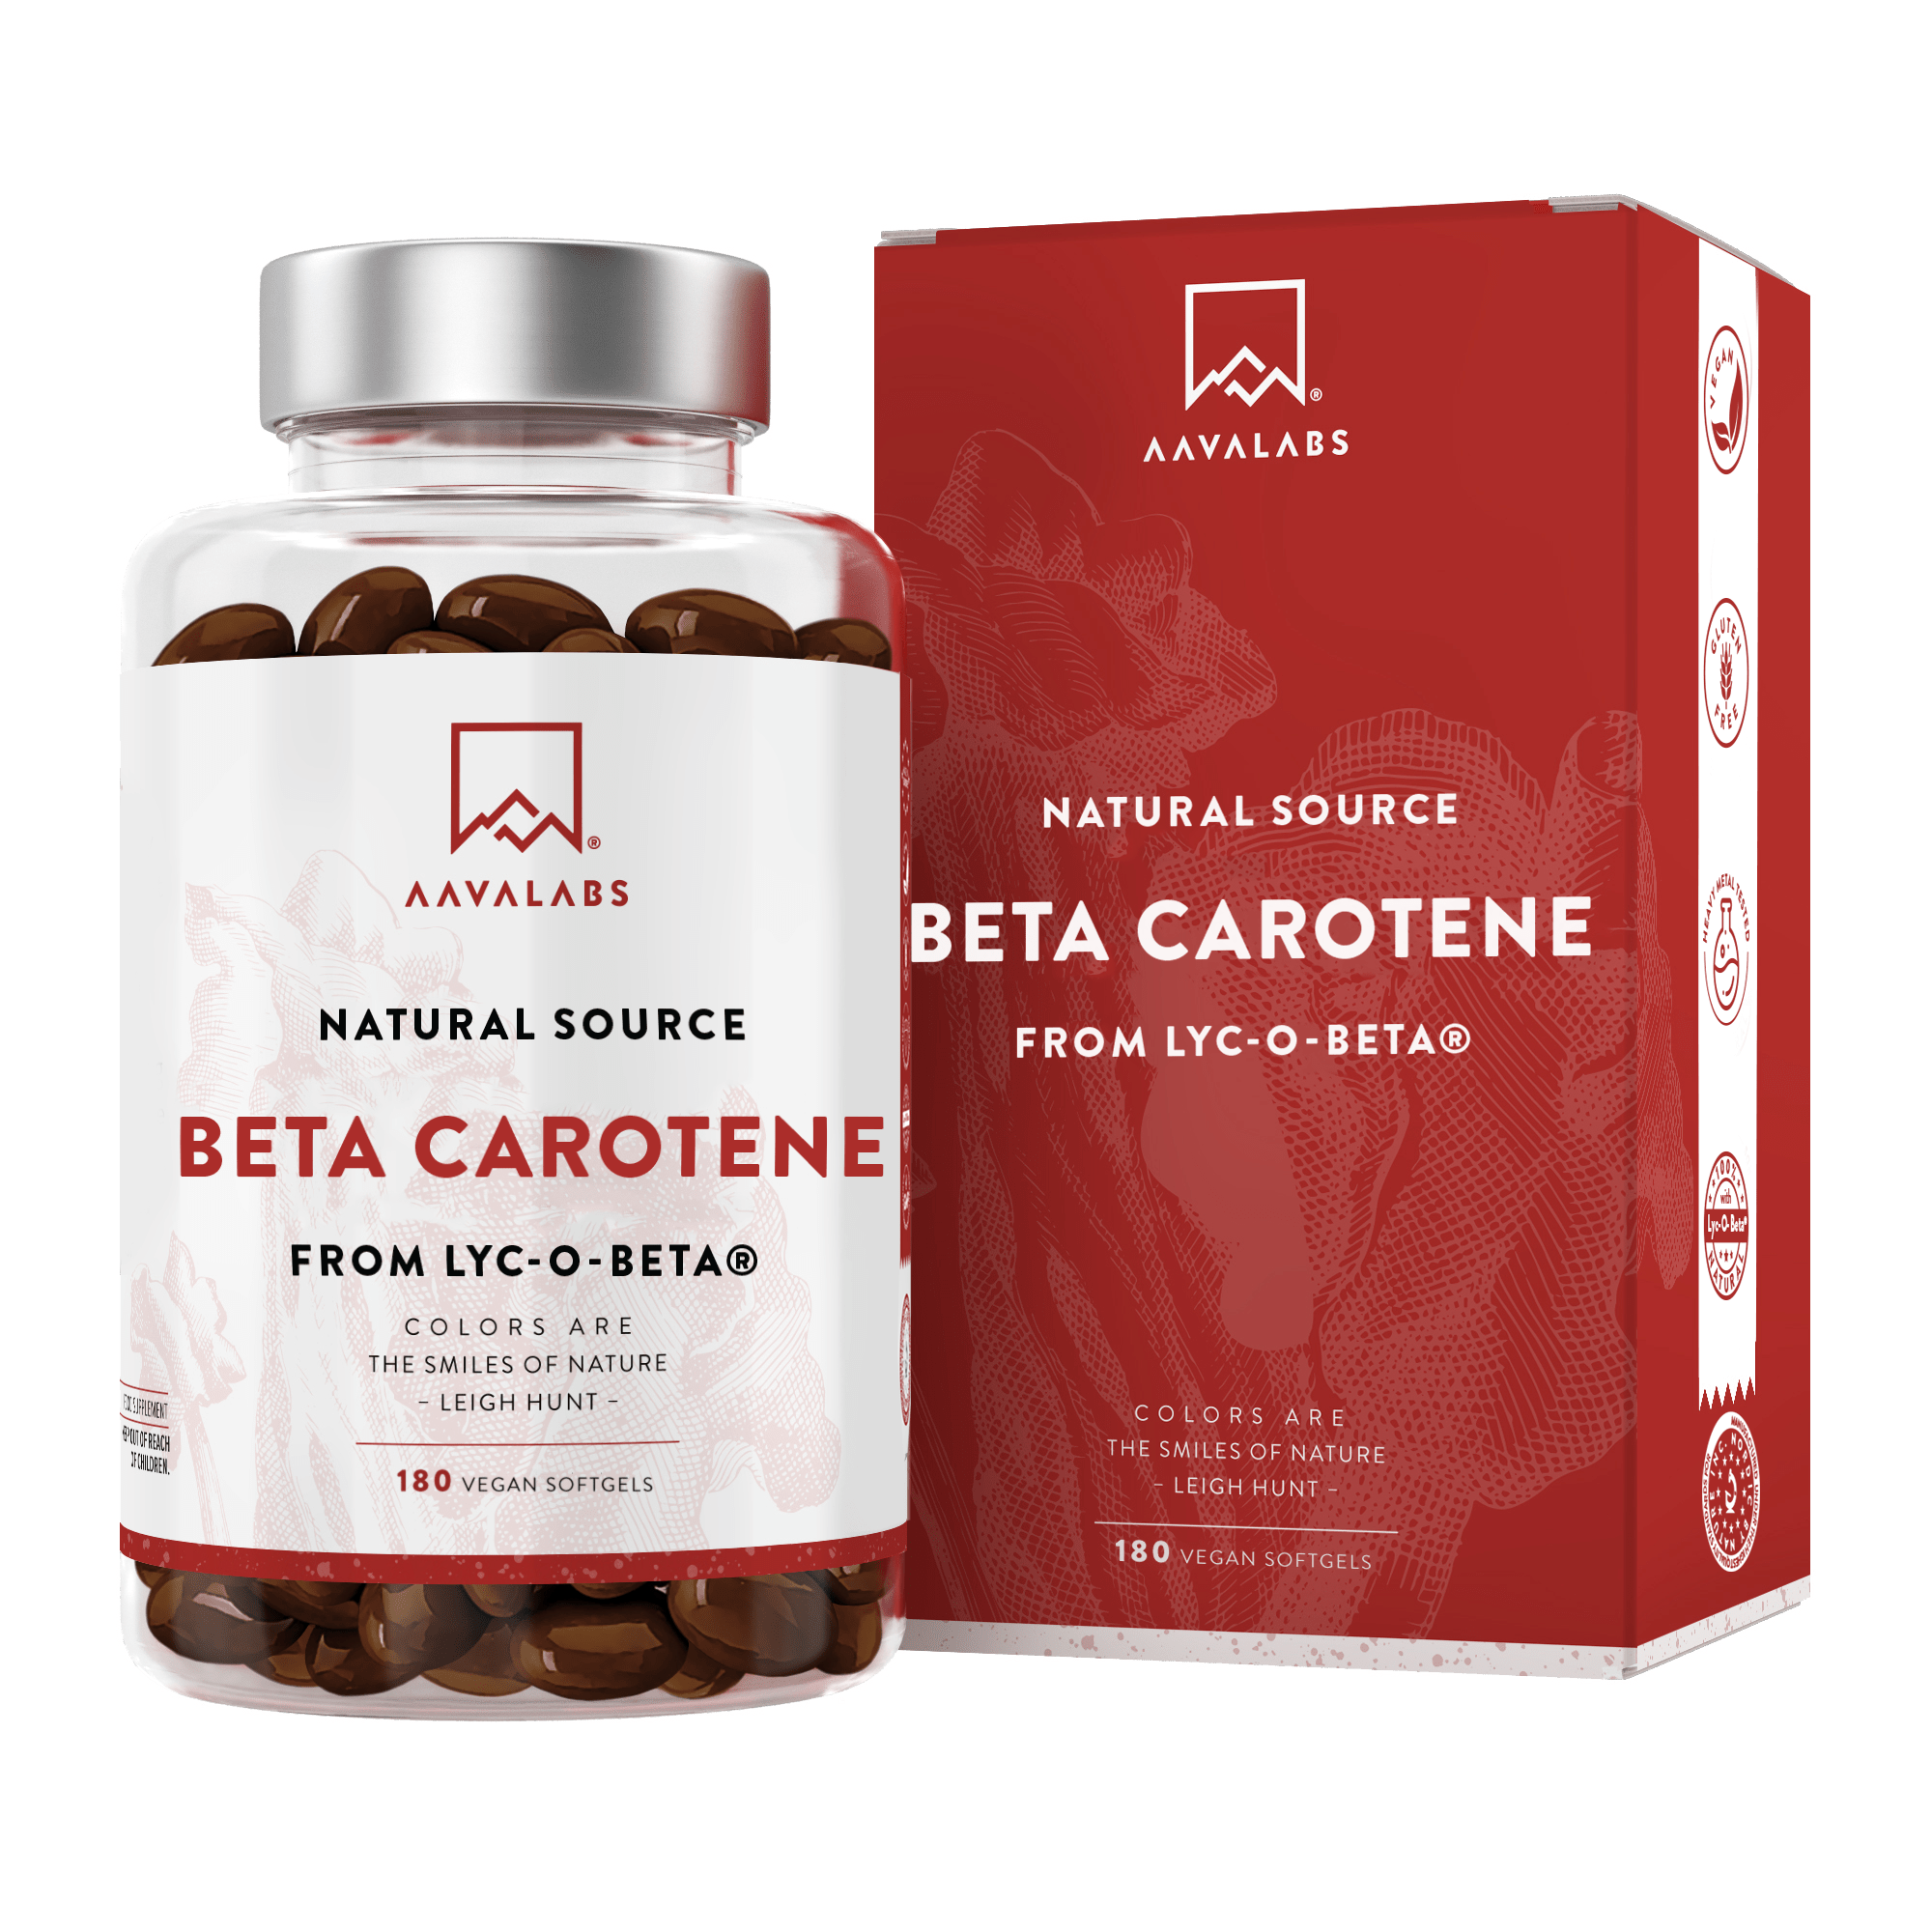 Image of Aavalabs Beta Carotene bottle and box